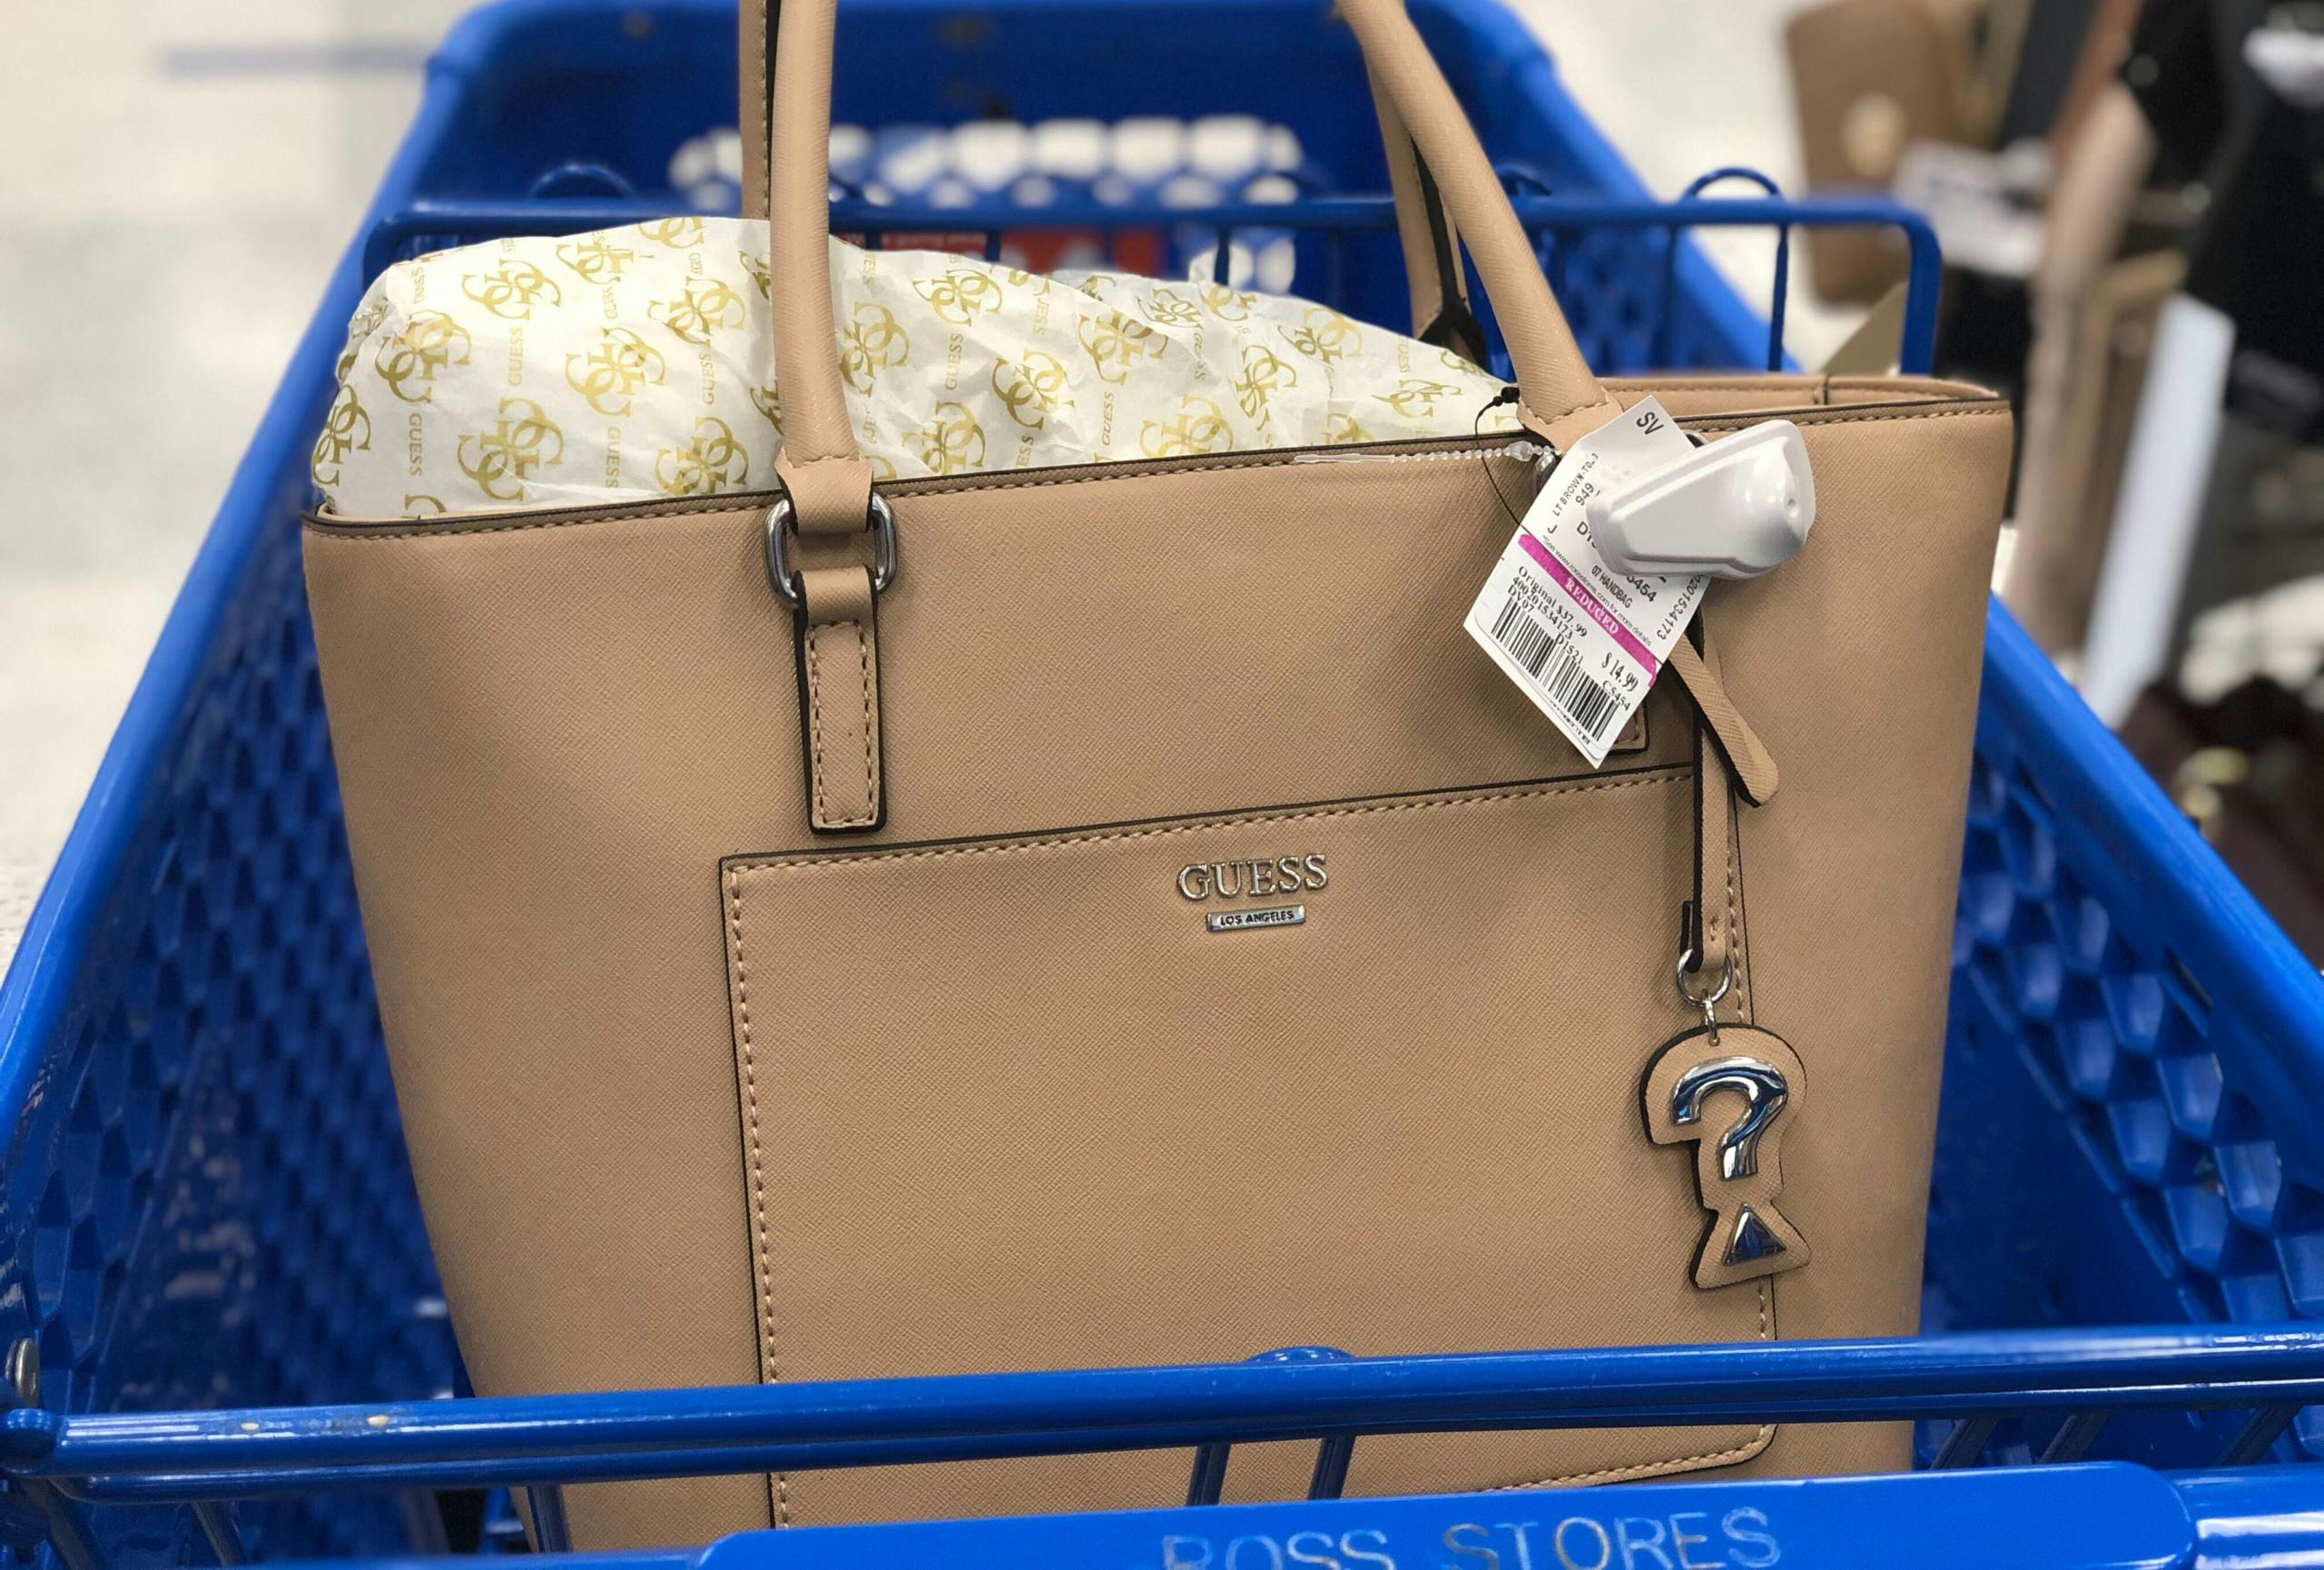 Mocha #Guess bag at Ross for $27.99 on sale. (Didn't get it